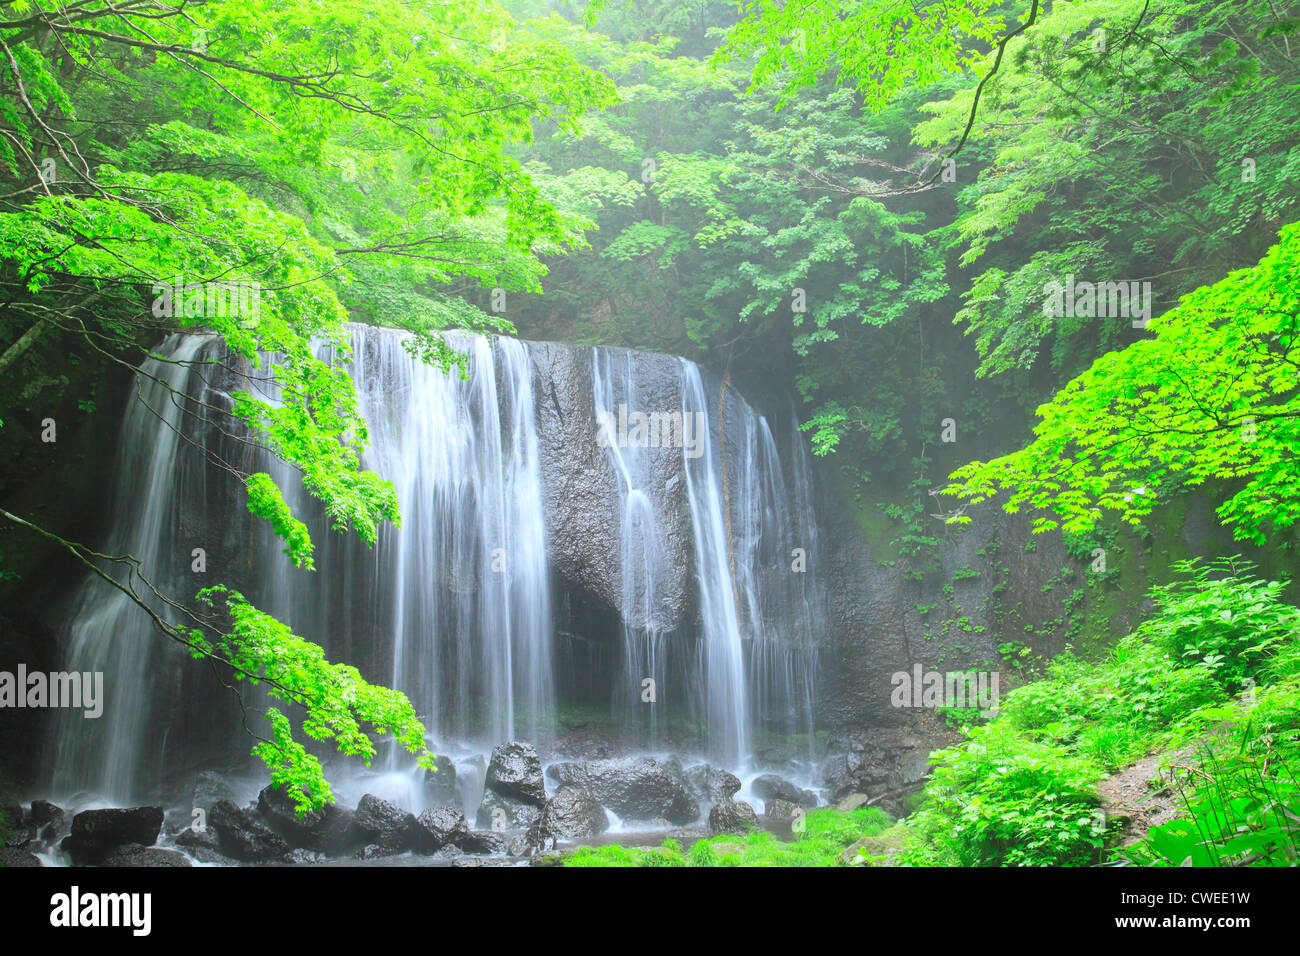 Waterfalls In Lush Forest Stock Photo